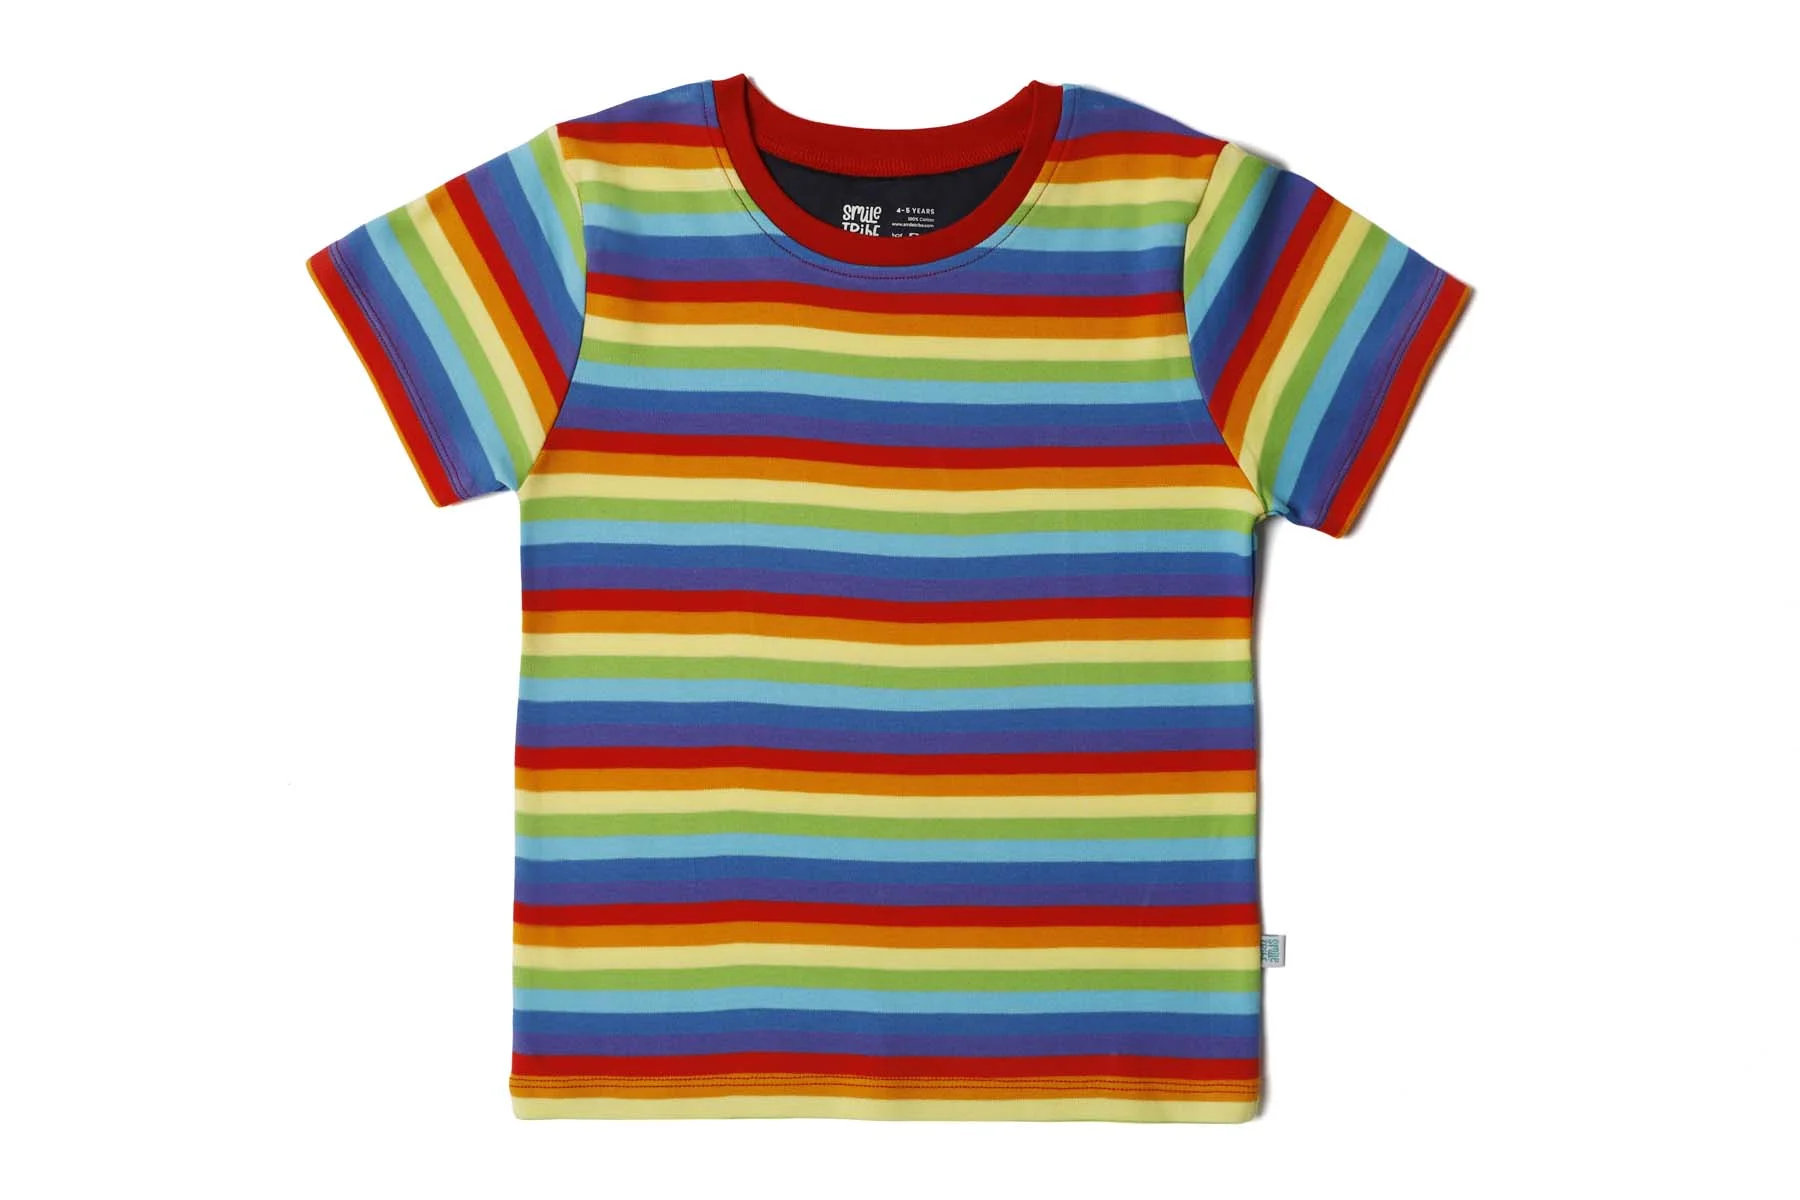 Great Premium Clothing T-shirt - at Rainbow Kids Prices